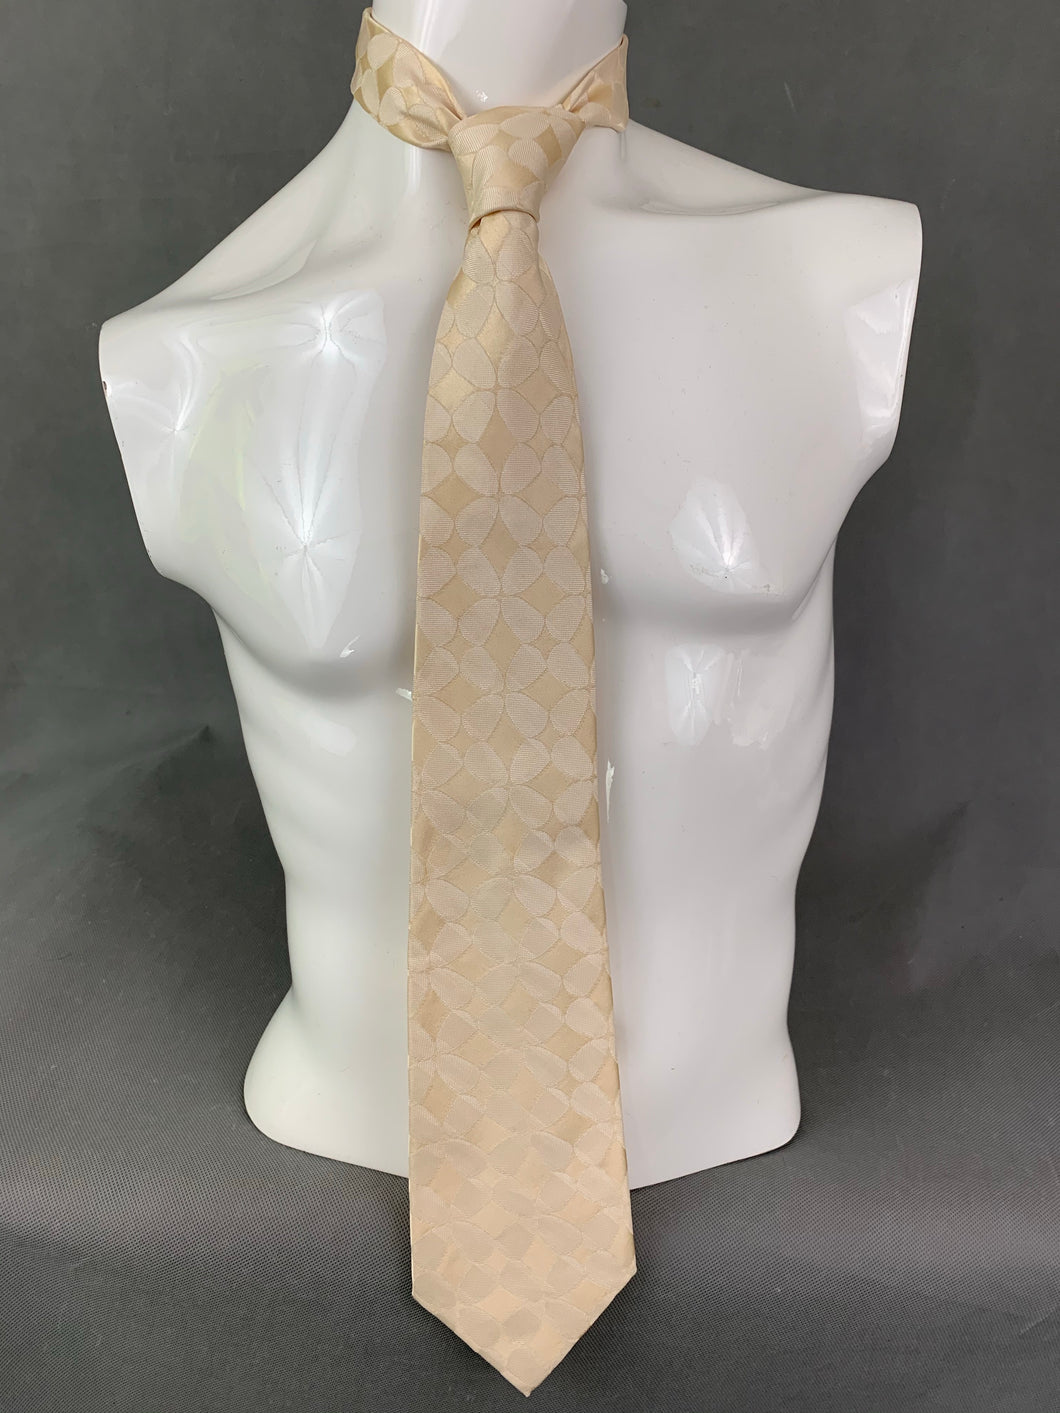 AQUASCUTUM London Mens 100% SILK Patterned TIE - Made in England